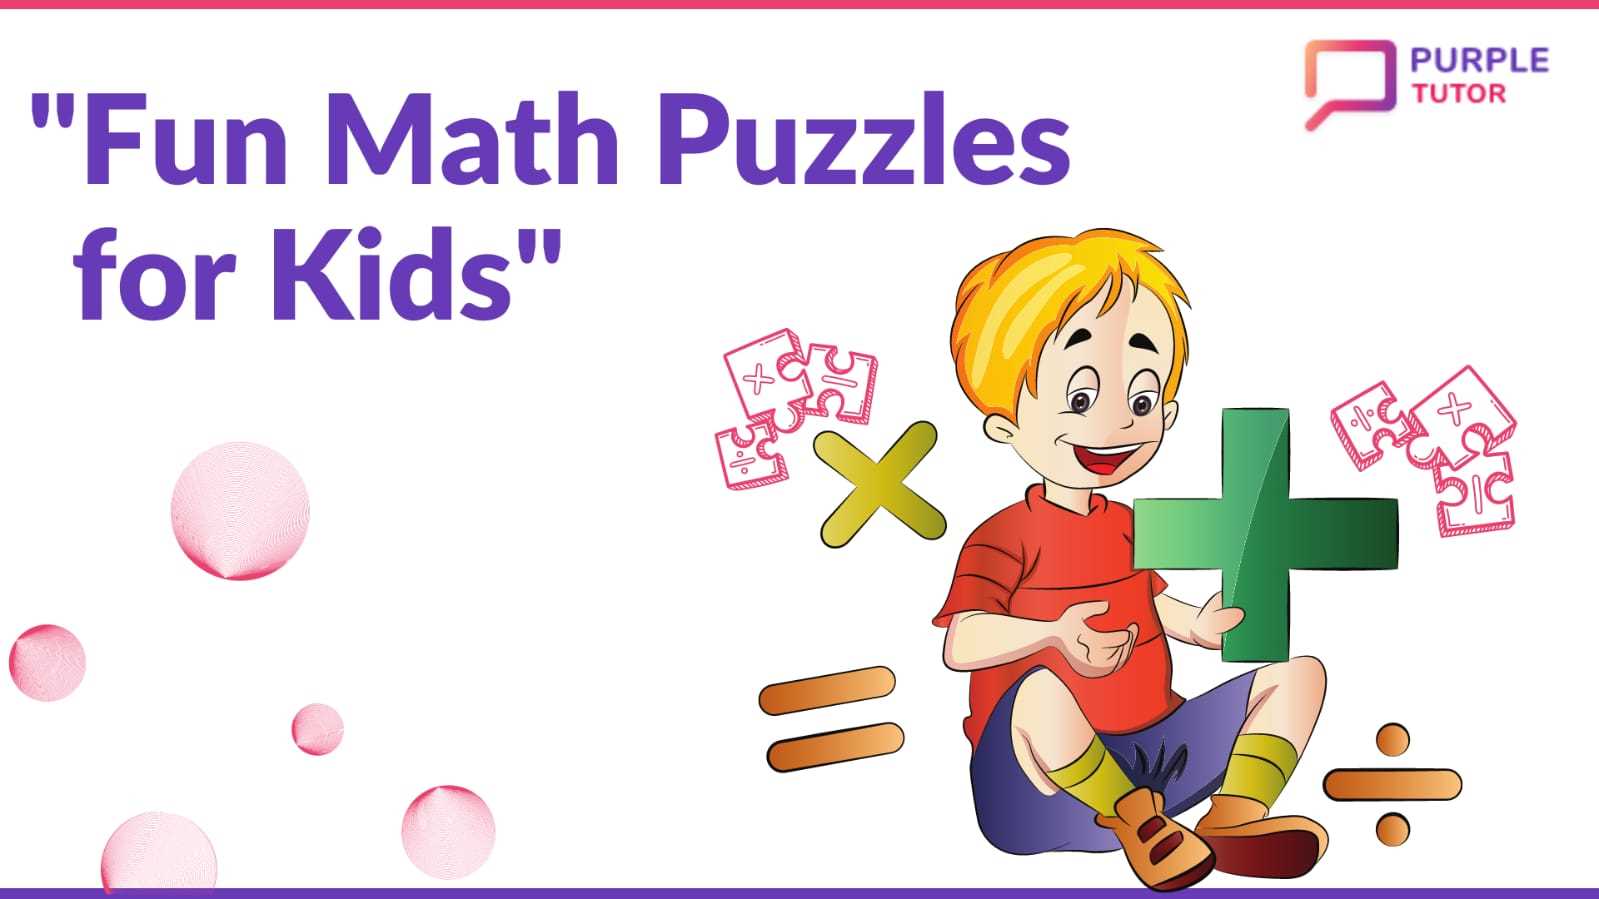 Fun math puzzles for kids